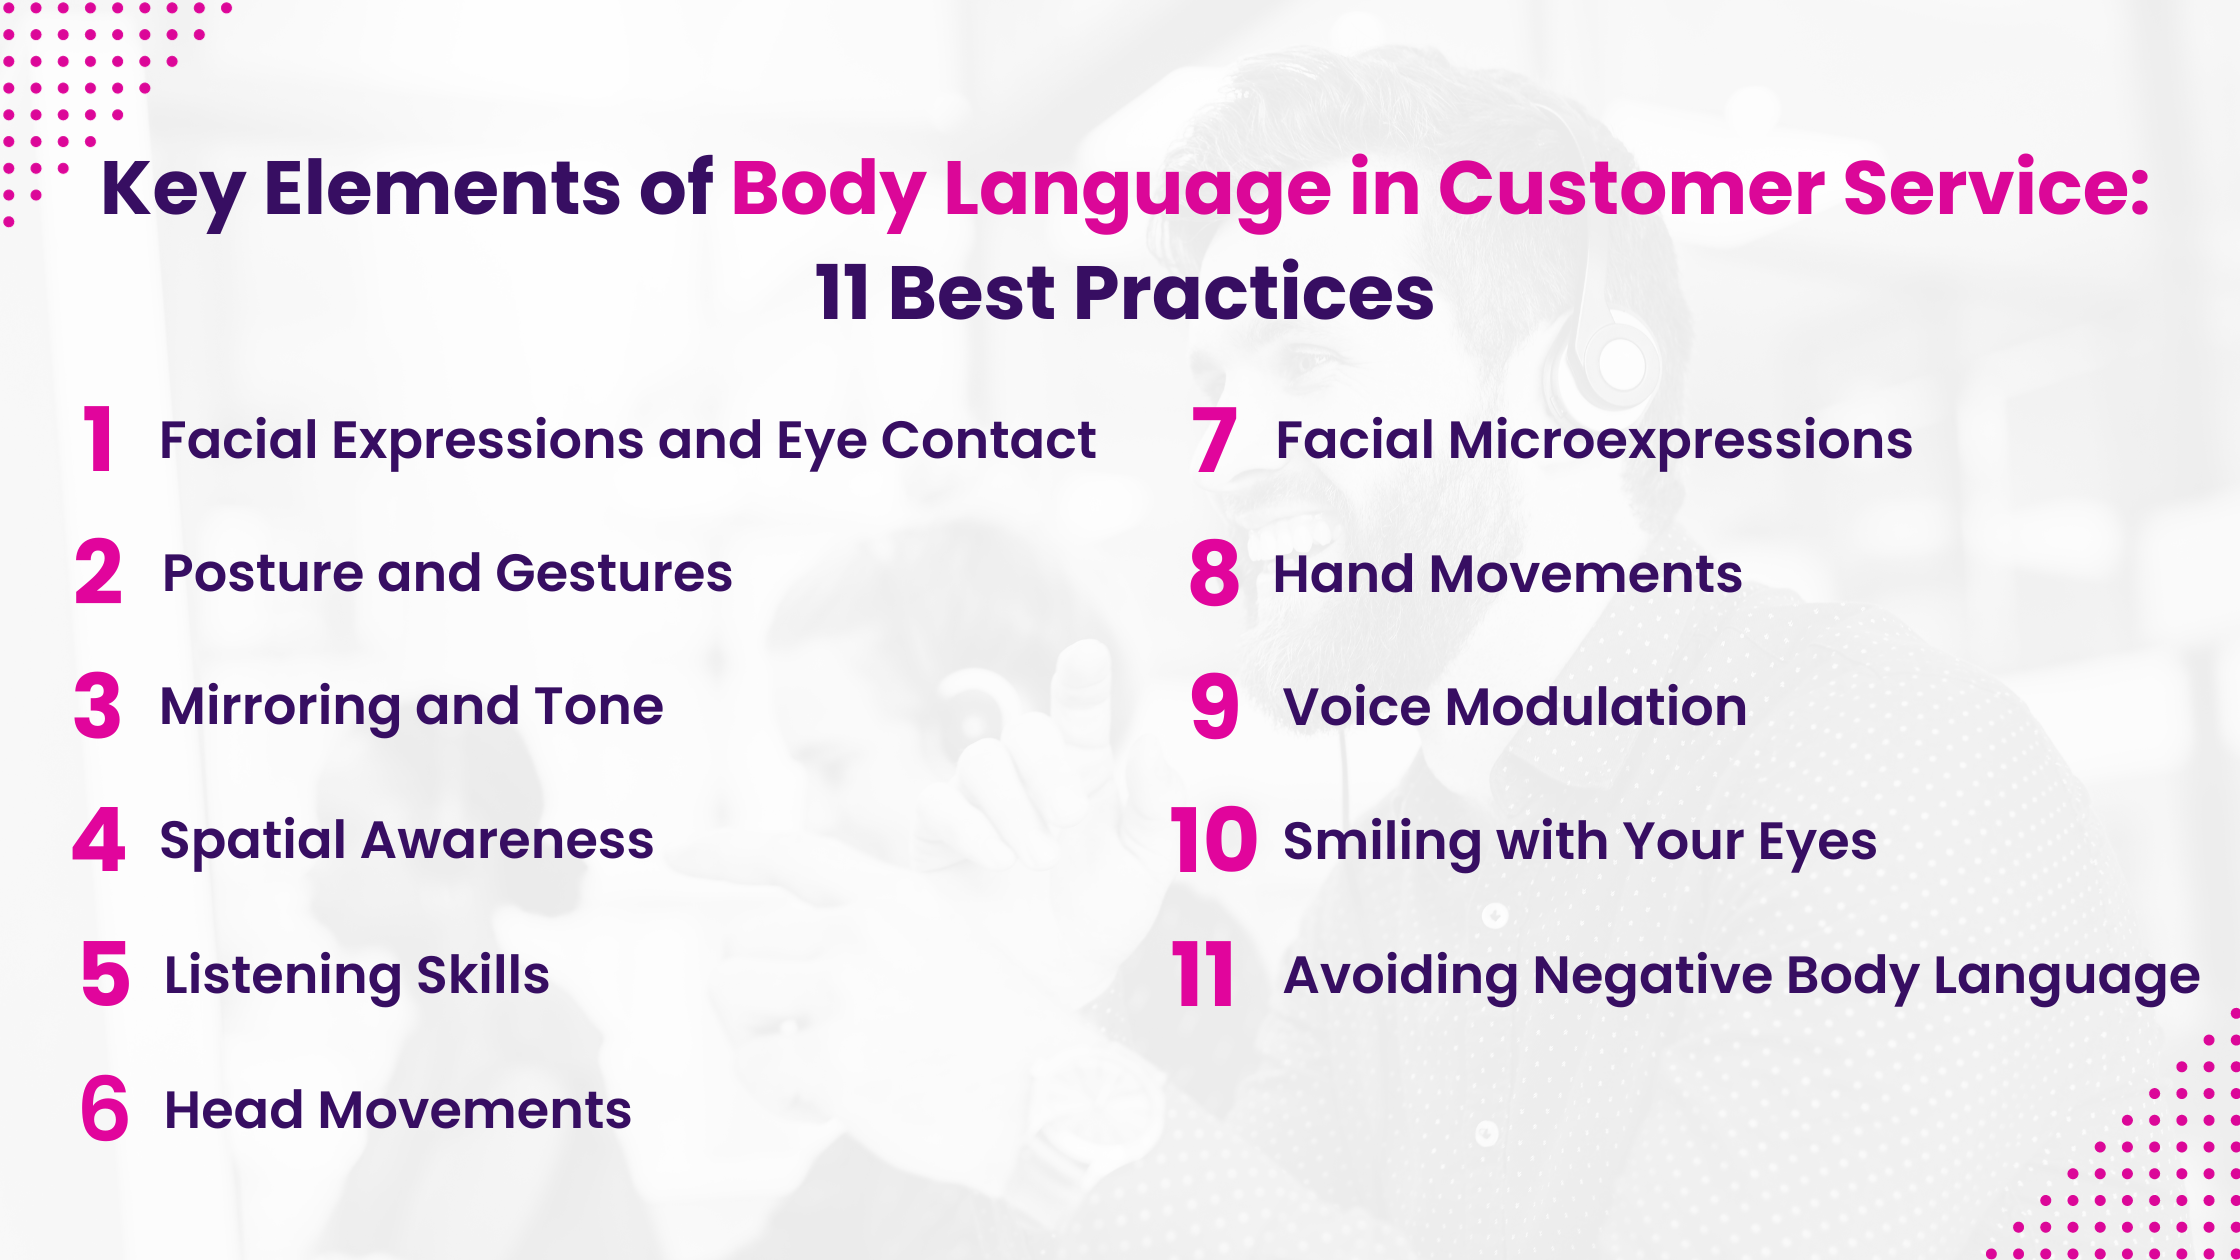 Key Elements of Body Language in Customer Service 11 Best Practices